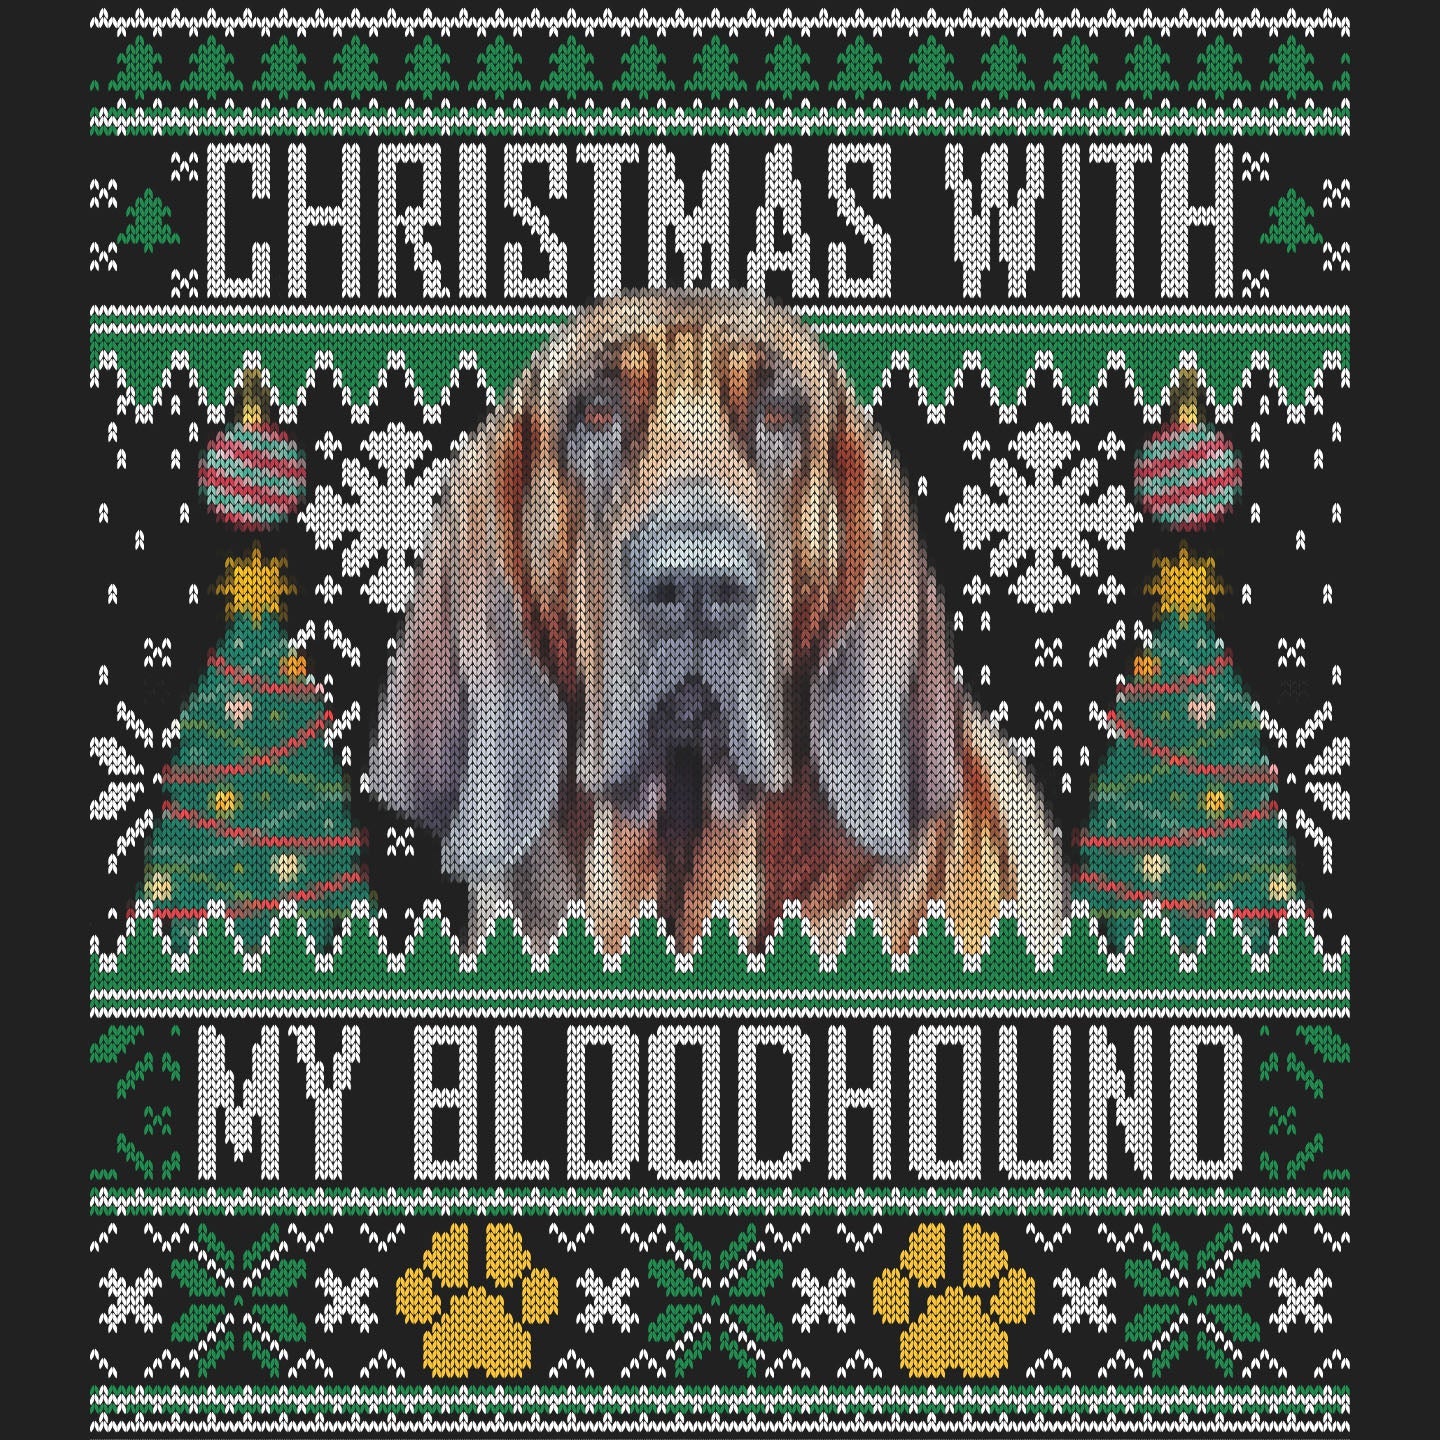 Ugly Sweater Christmas with My Bloodhound - Women's V-Neck Long Sleeve T-Shirt